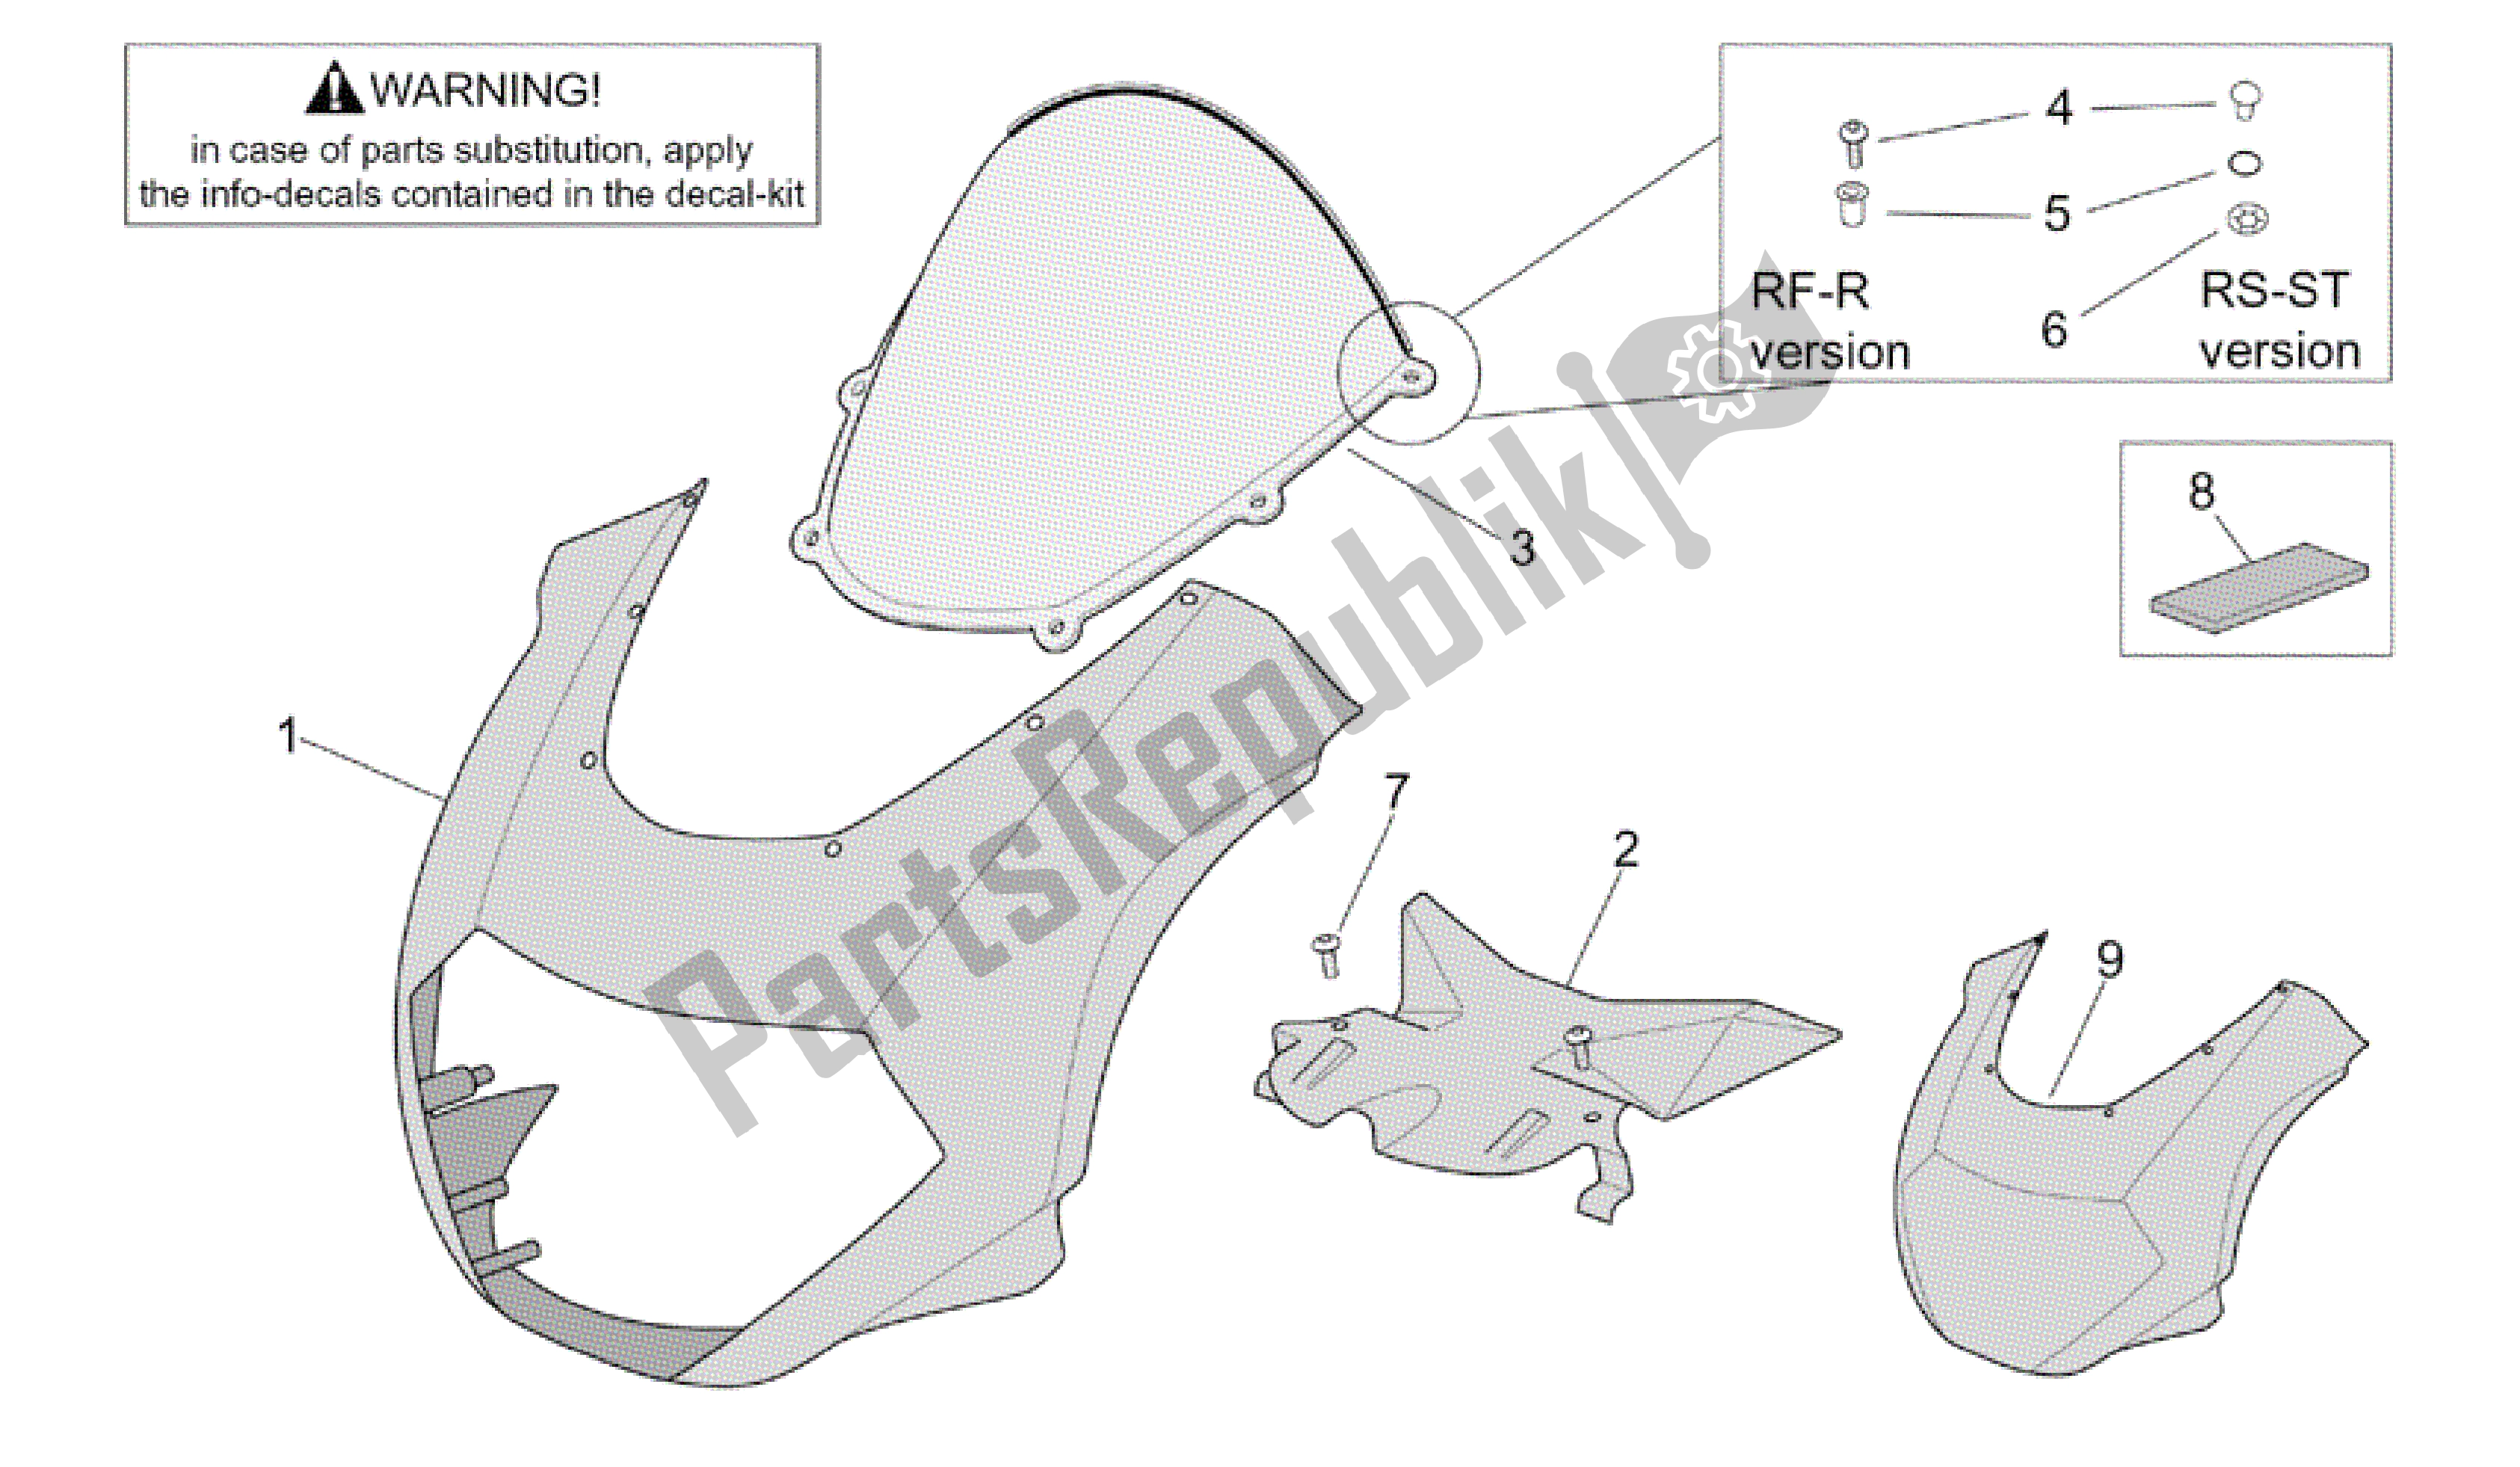 All parts for the Front Body - Front Fairing of the Aprilia RSV Tuono 3952 1000 2002 - 2003